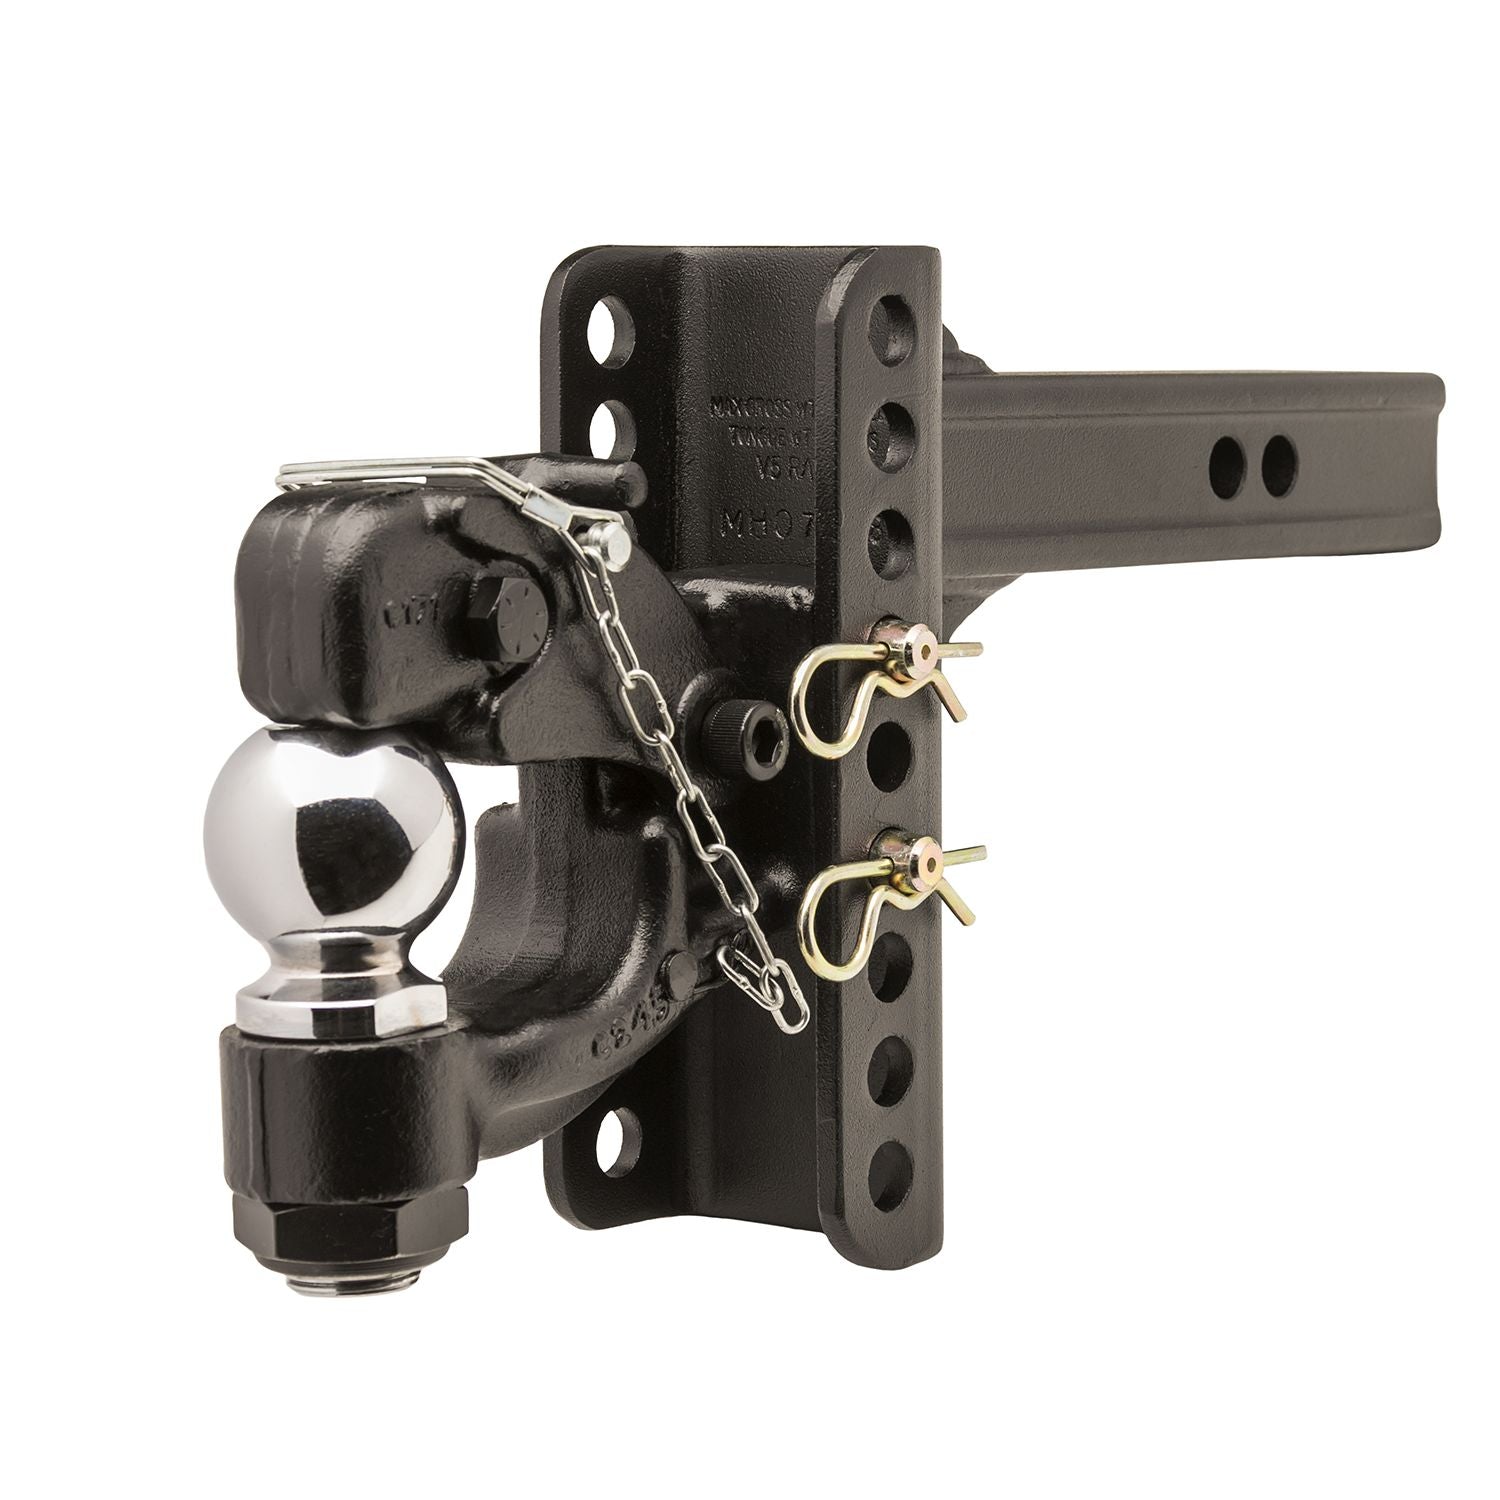 Advance Engineering 10010 - Pintle Hook Towing System for Pintle Ball 2" (Regular Duty)